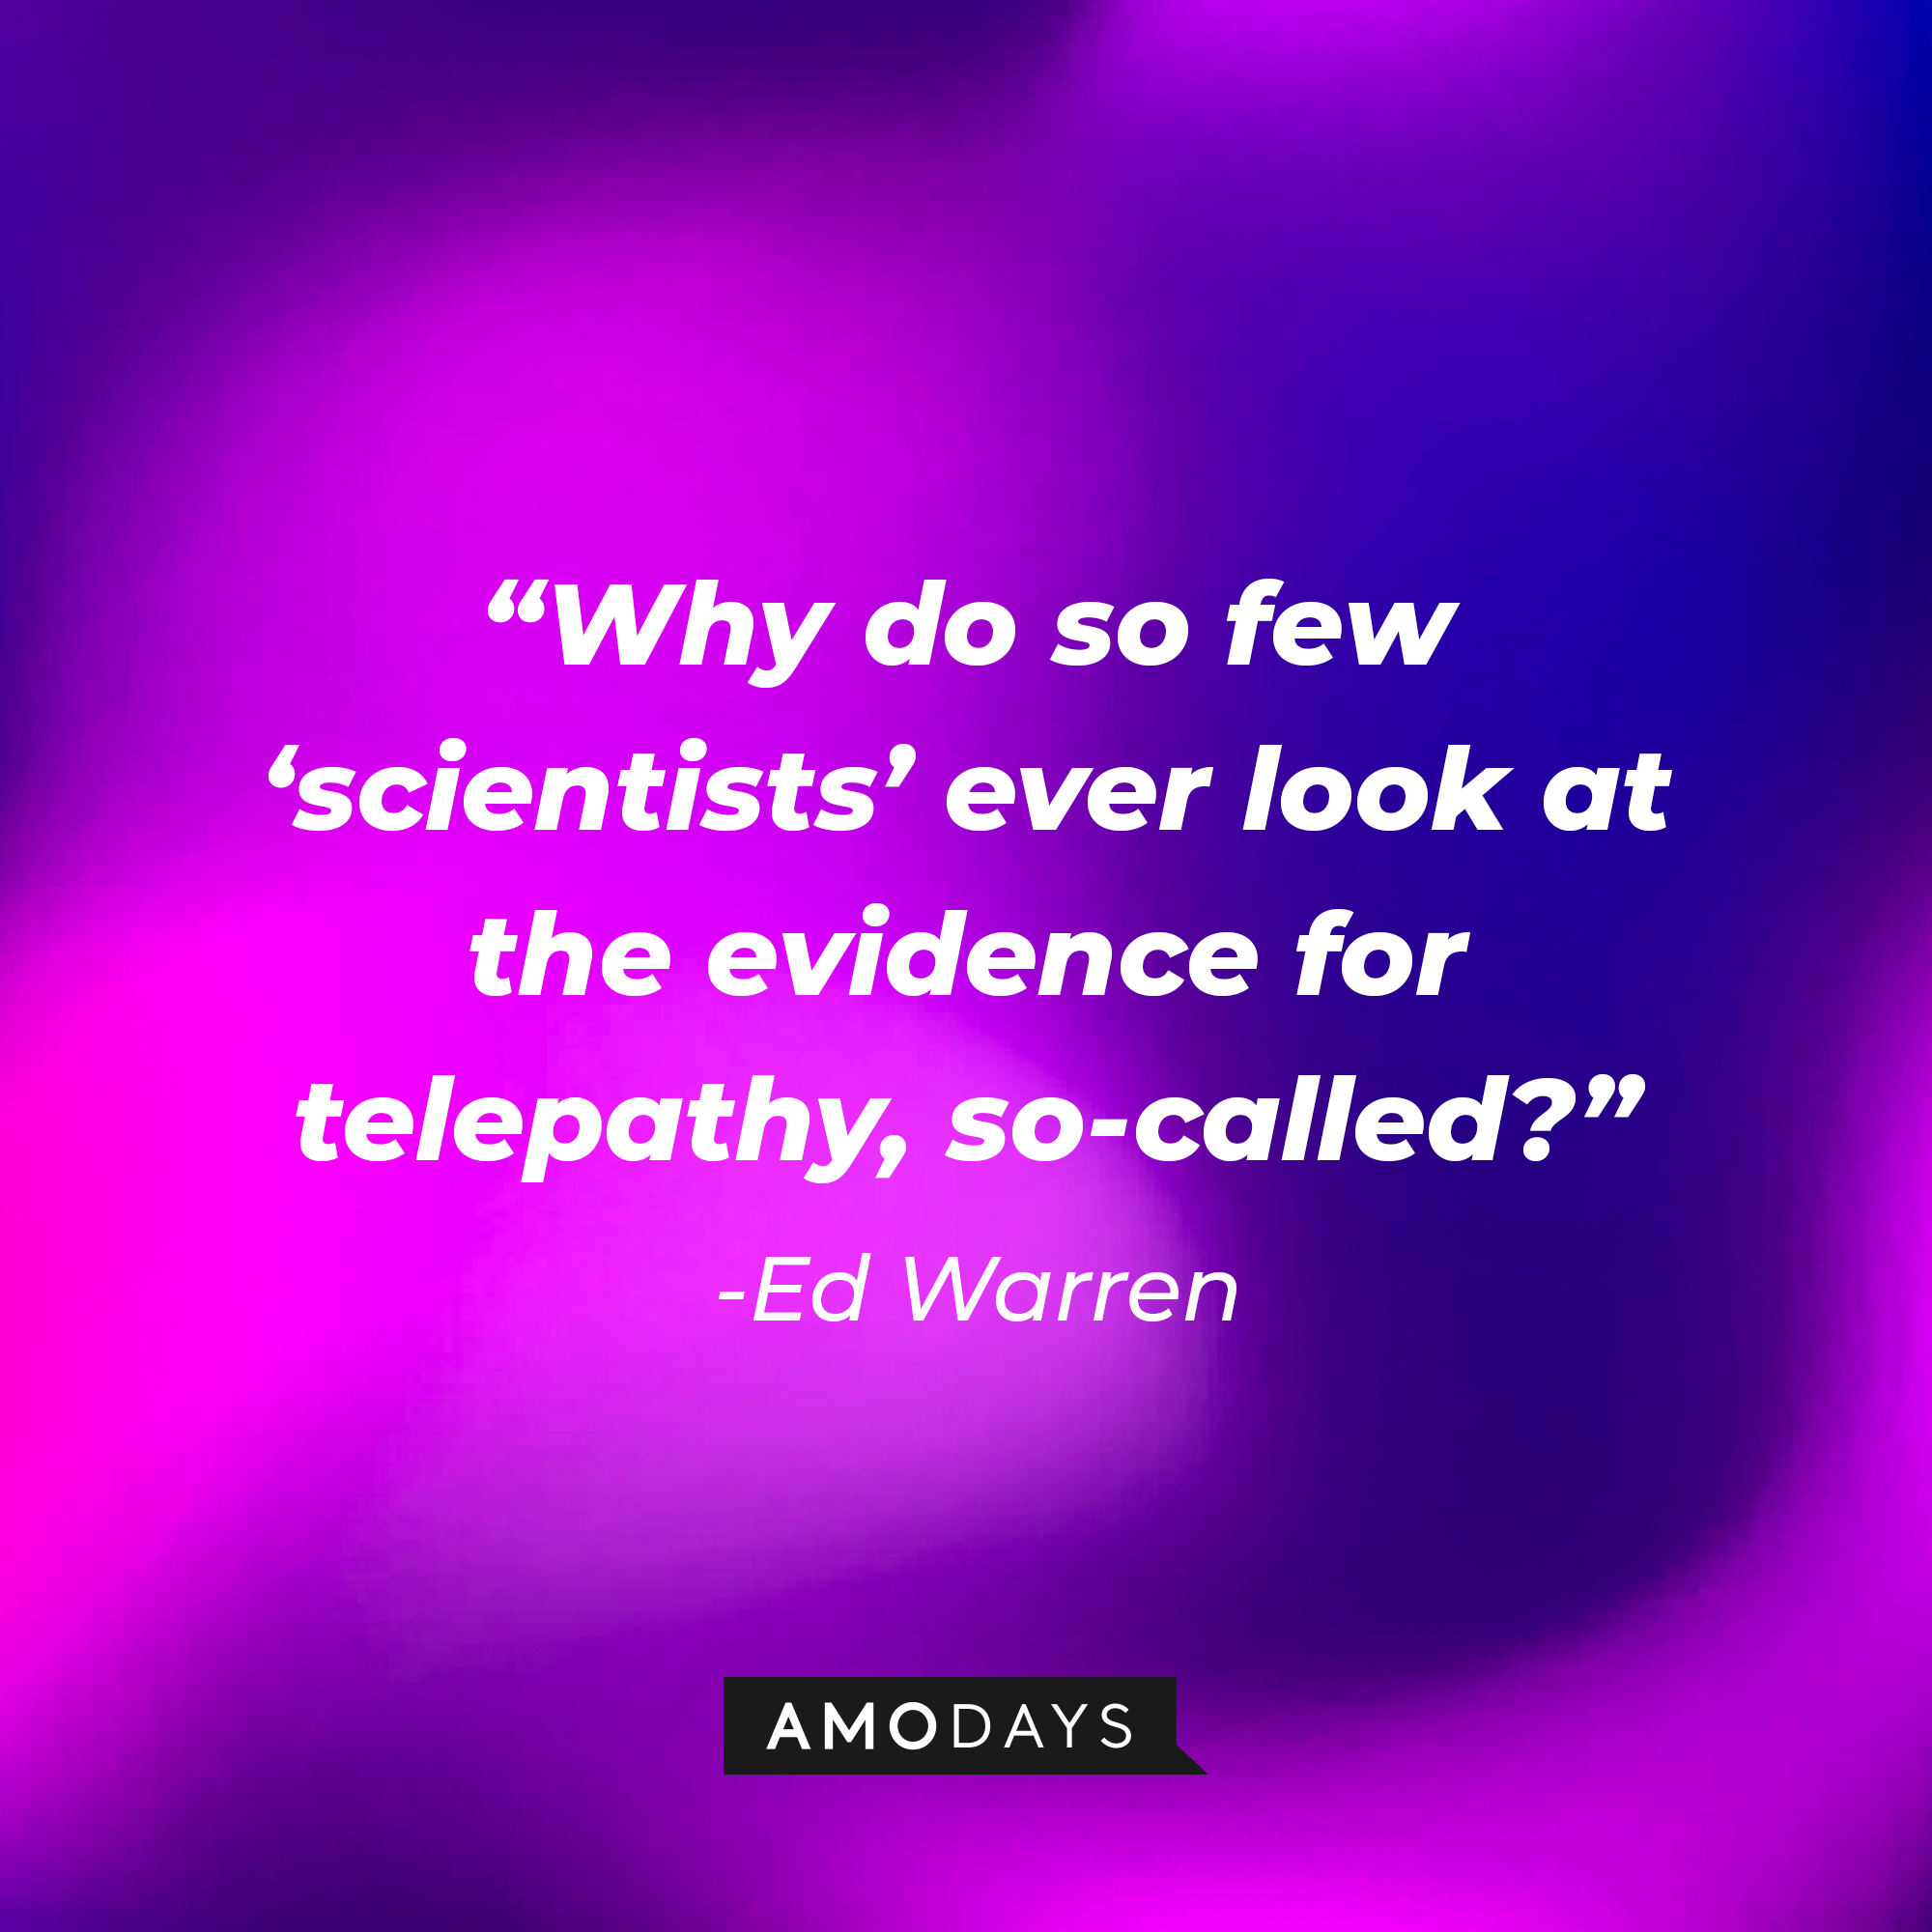 Ed Warren’s quote: “Why do so few ‘scientists’ ever look at the evidence for telepathy, so-called?” | Source: AmoDays